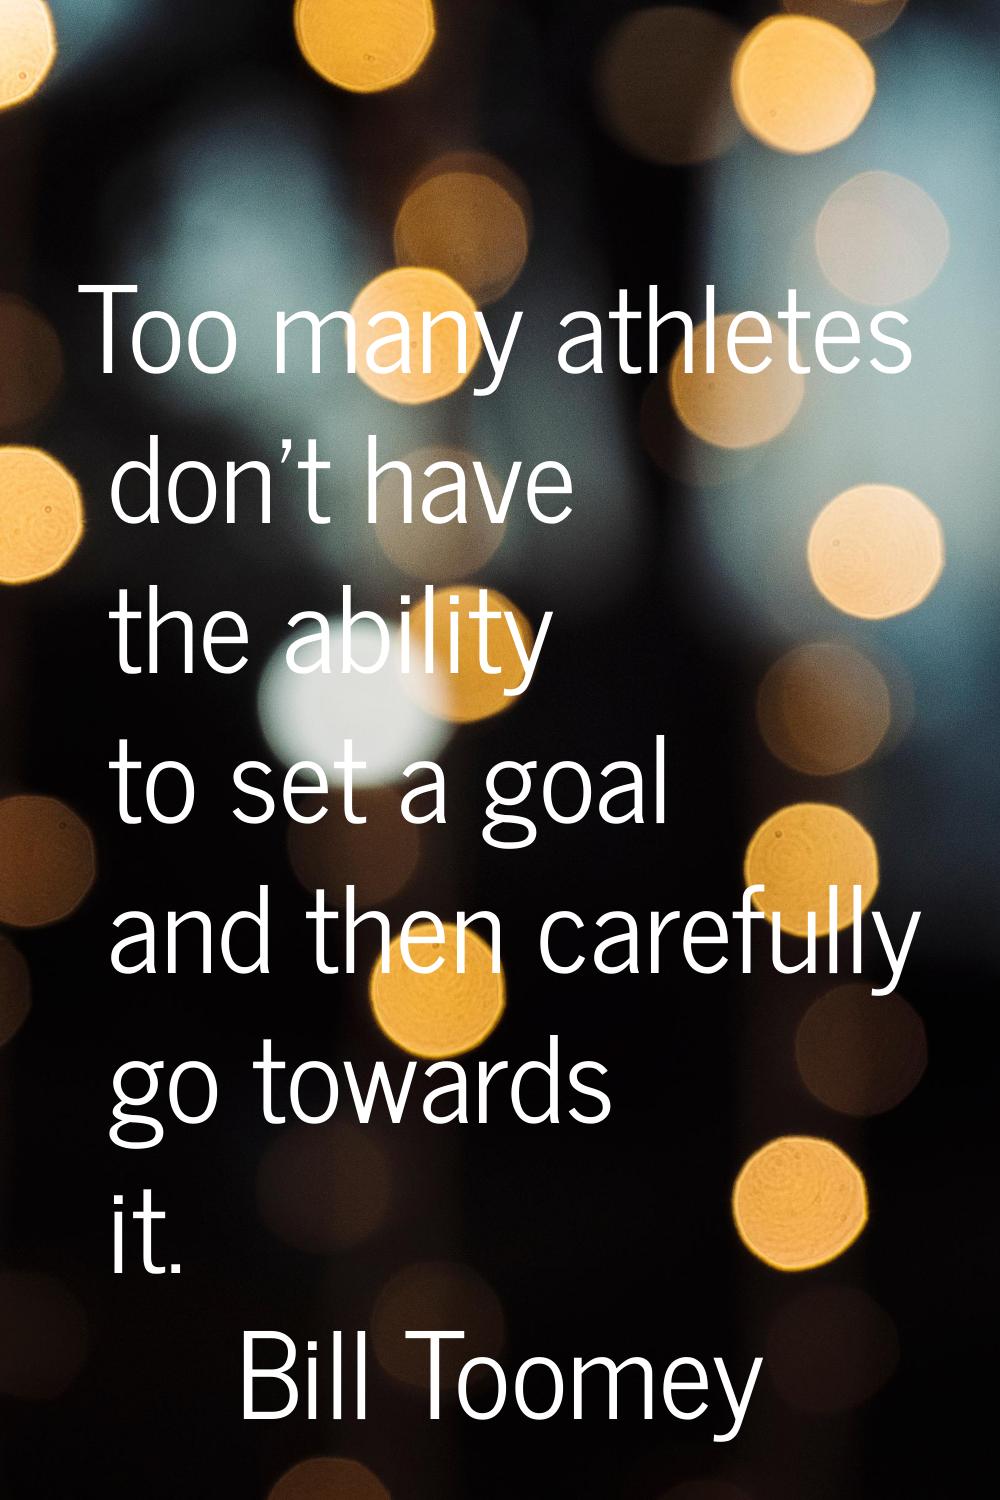 Too many athletes don't have the ability to set a goal and then carefully go towards it.